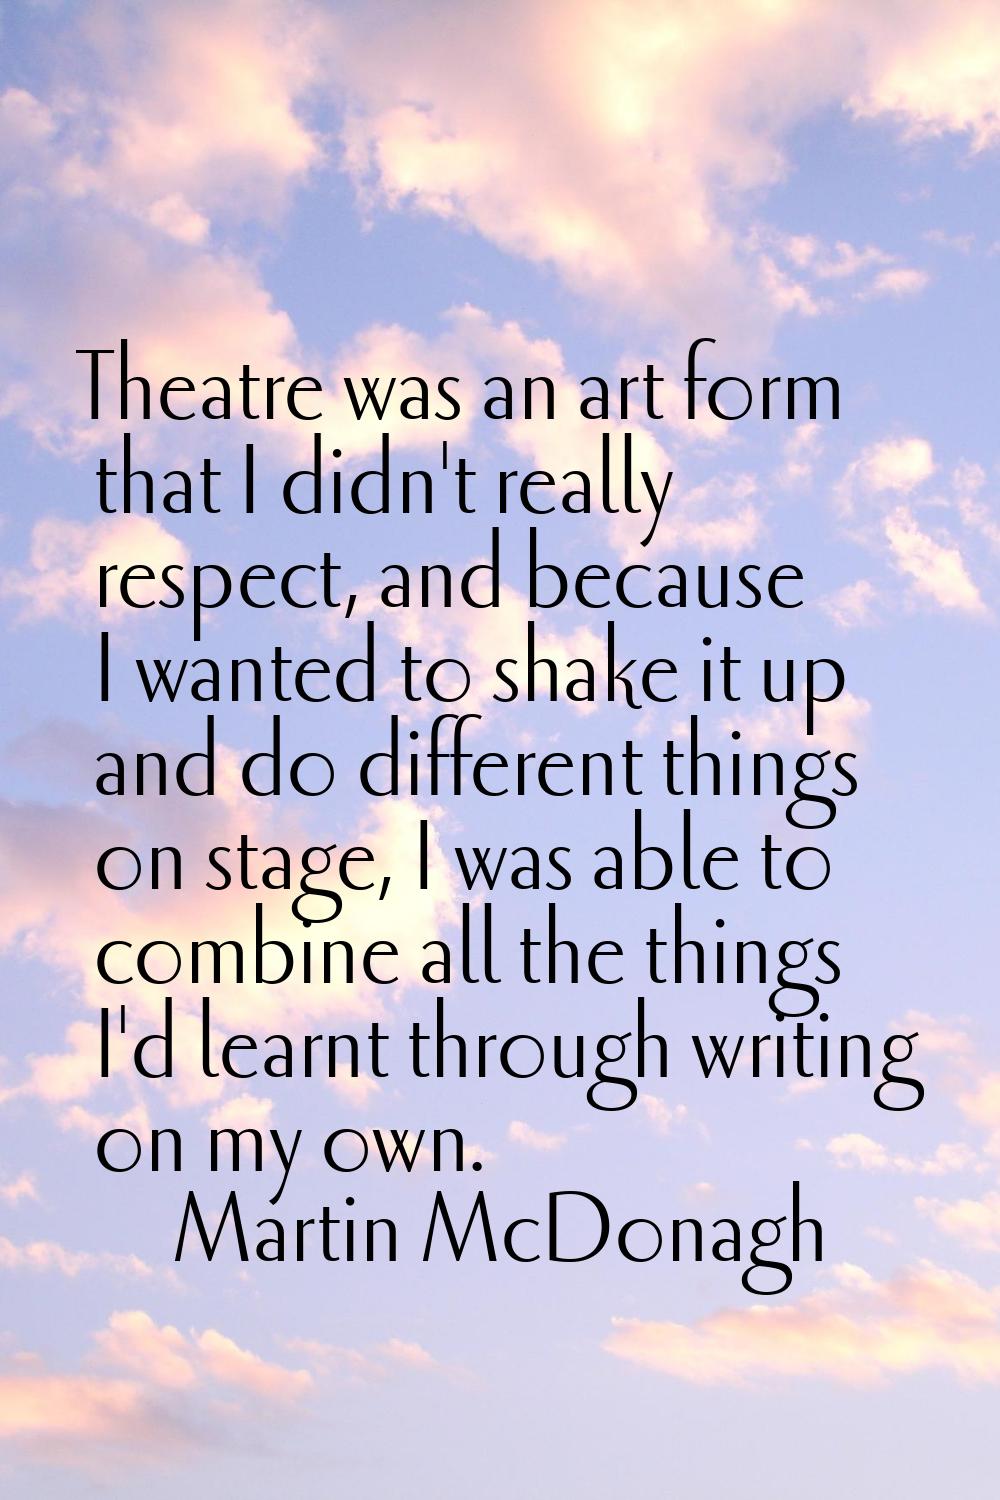 Theatre was an art form that I didn't really respect, and because I wanted to shake it up and do di